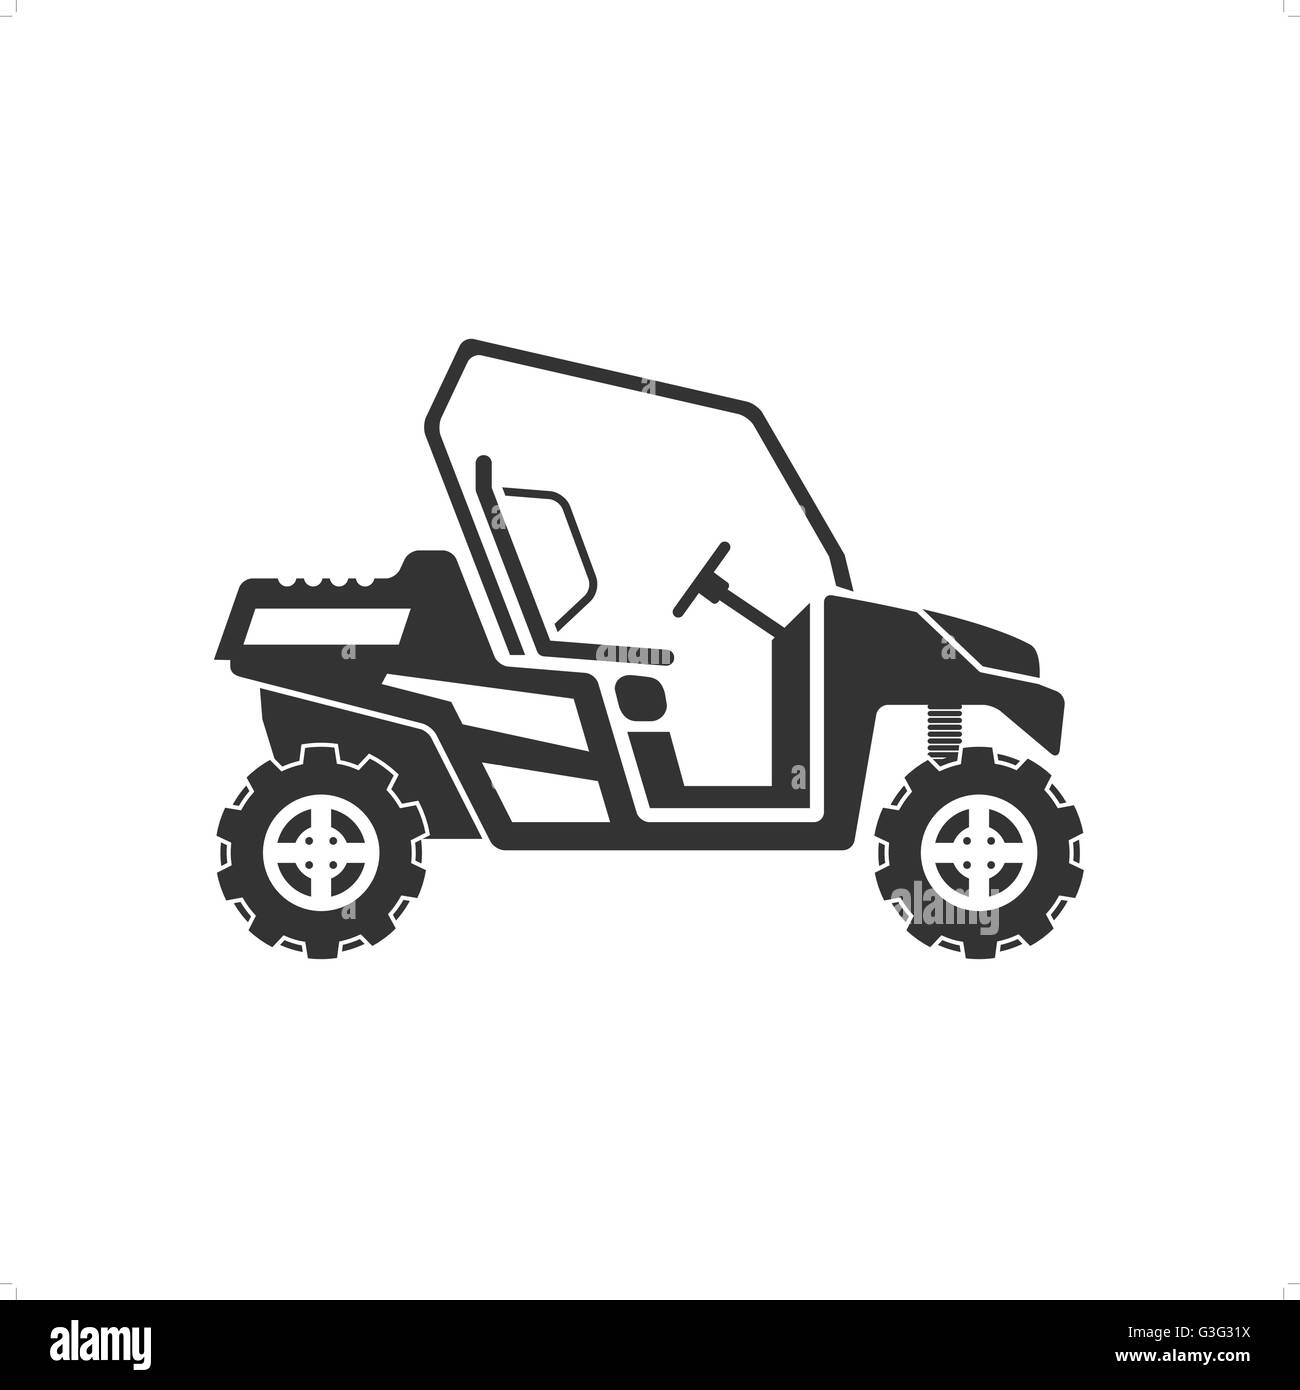 Dune buggy or desert car icon vector illustration isolated on white background. Stock Vector